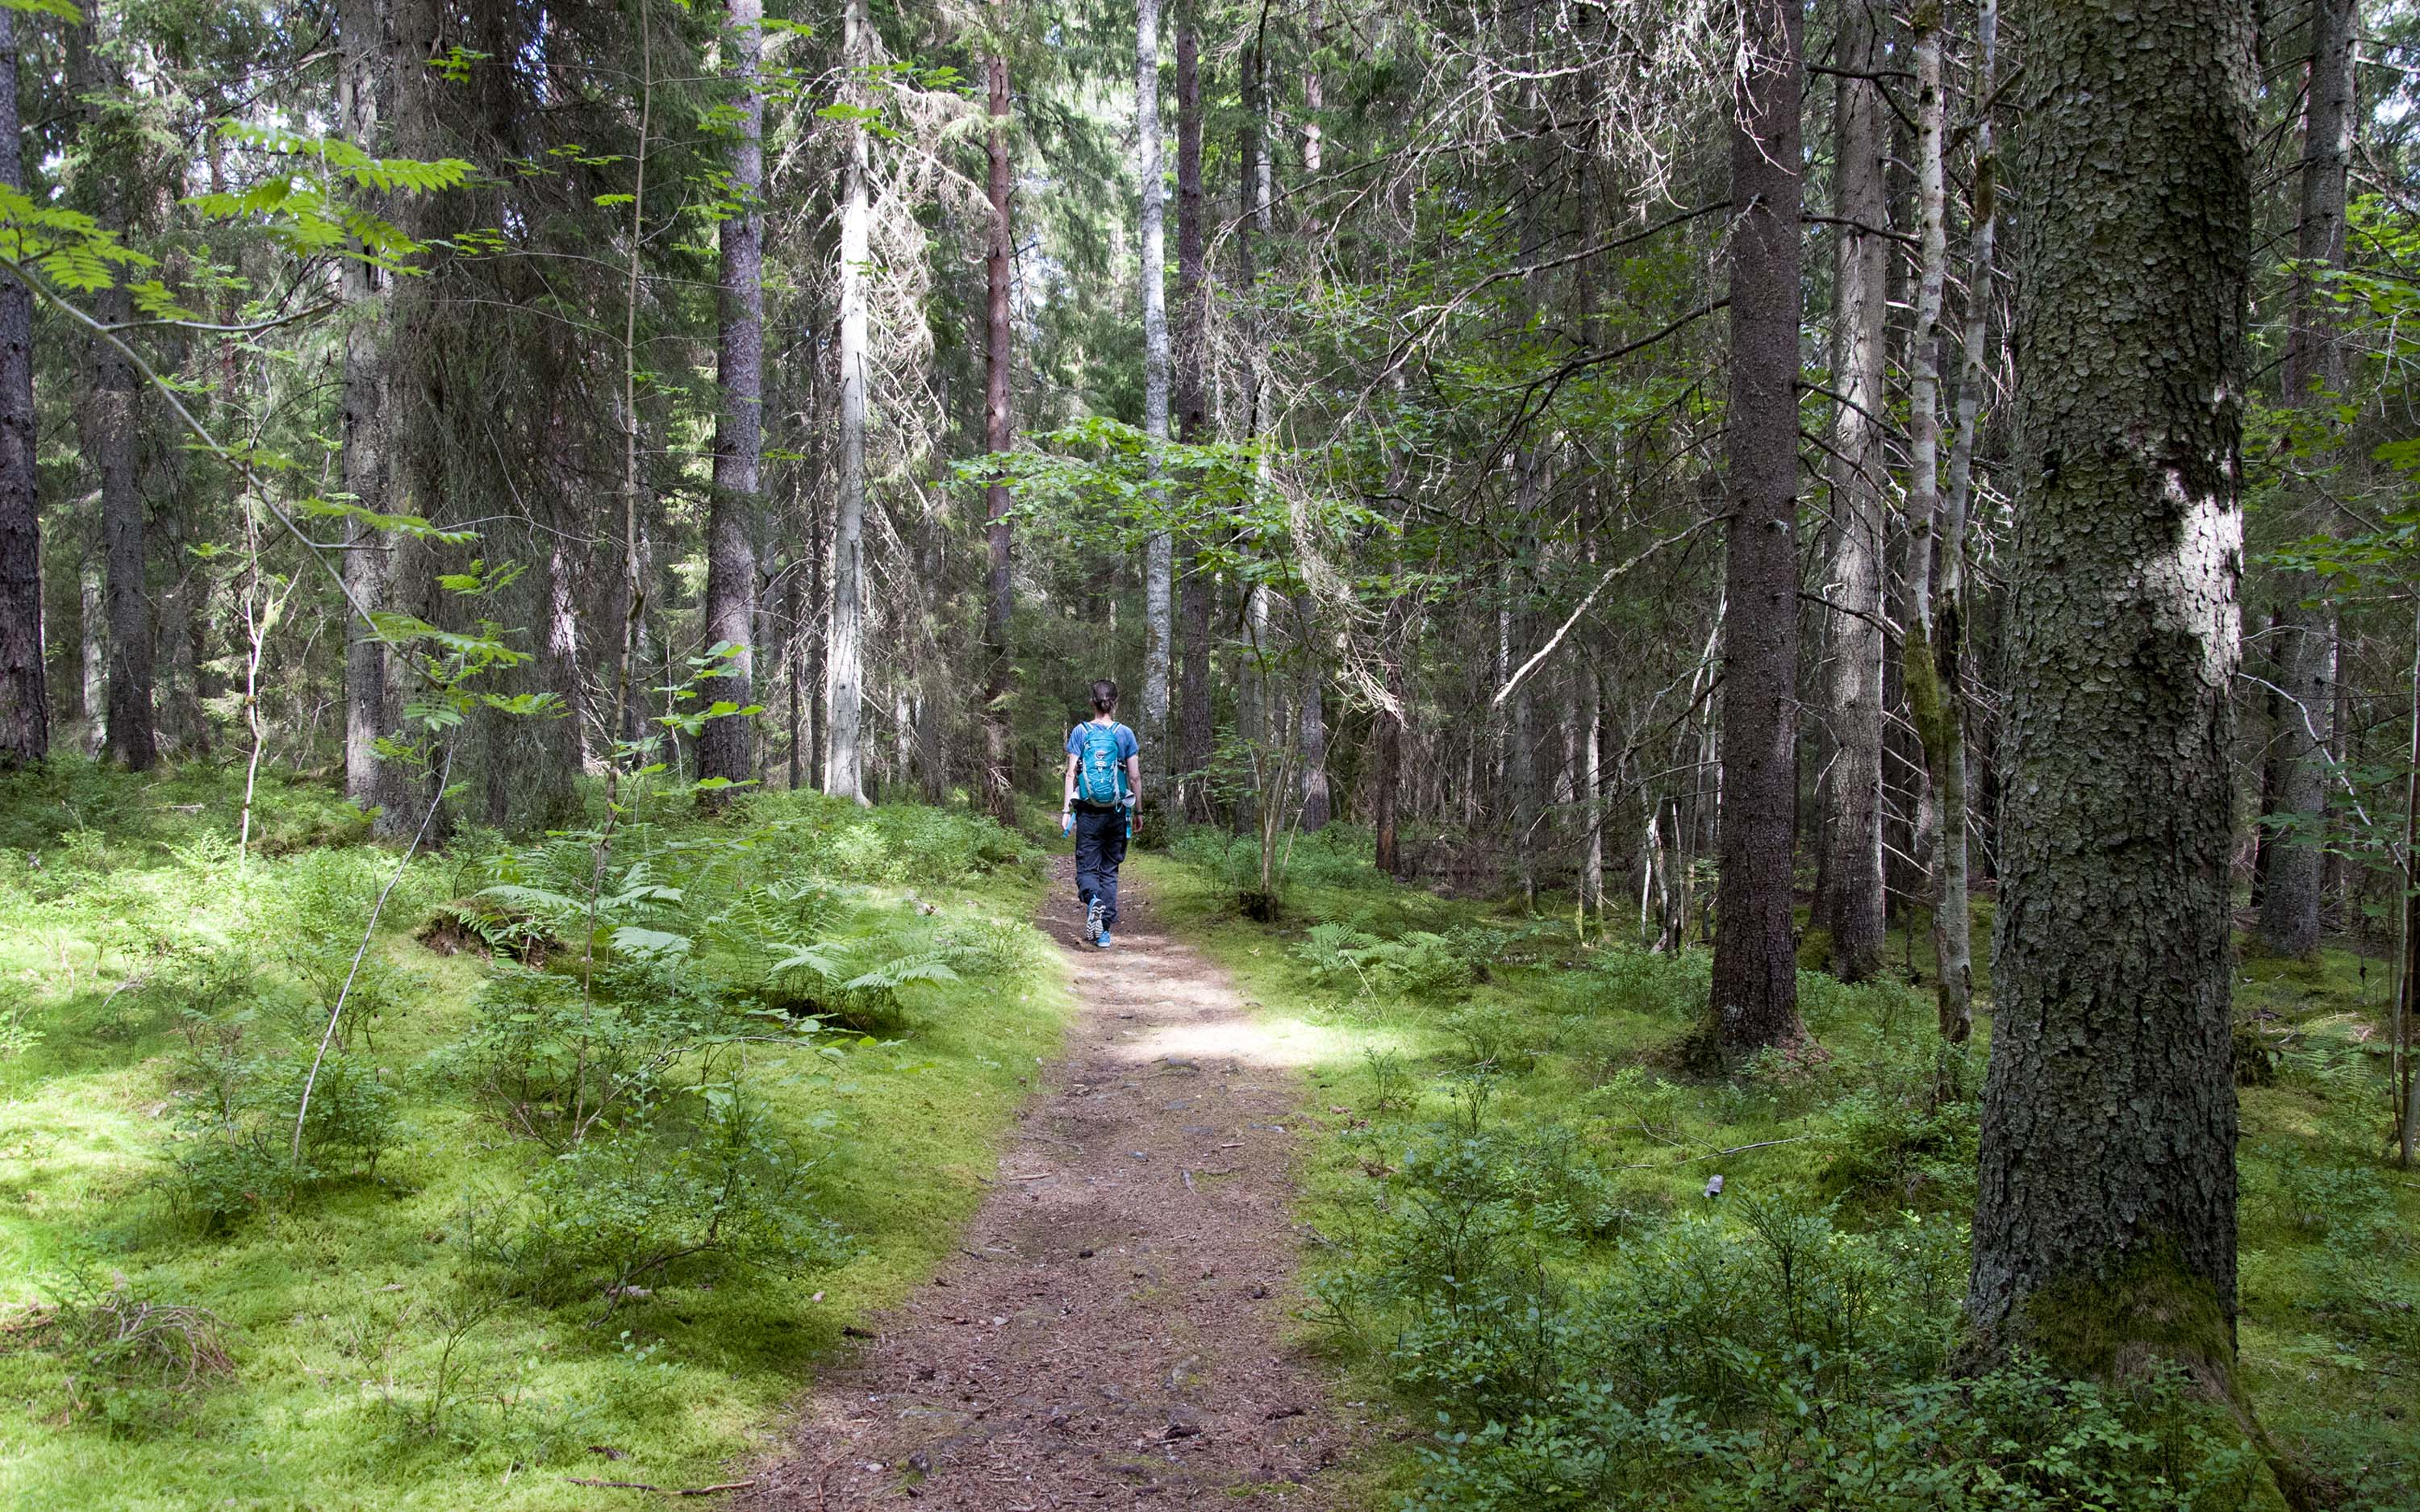 A person is walking on a path in the forest